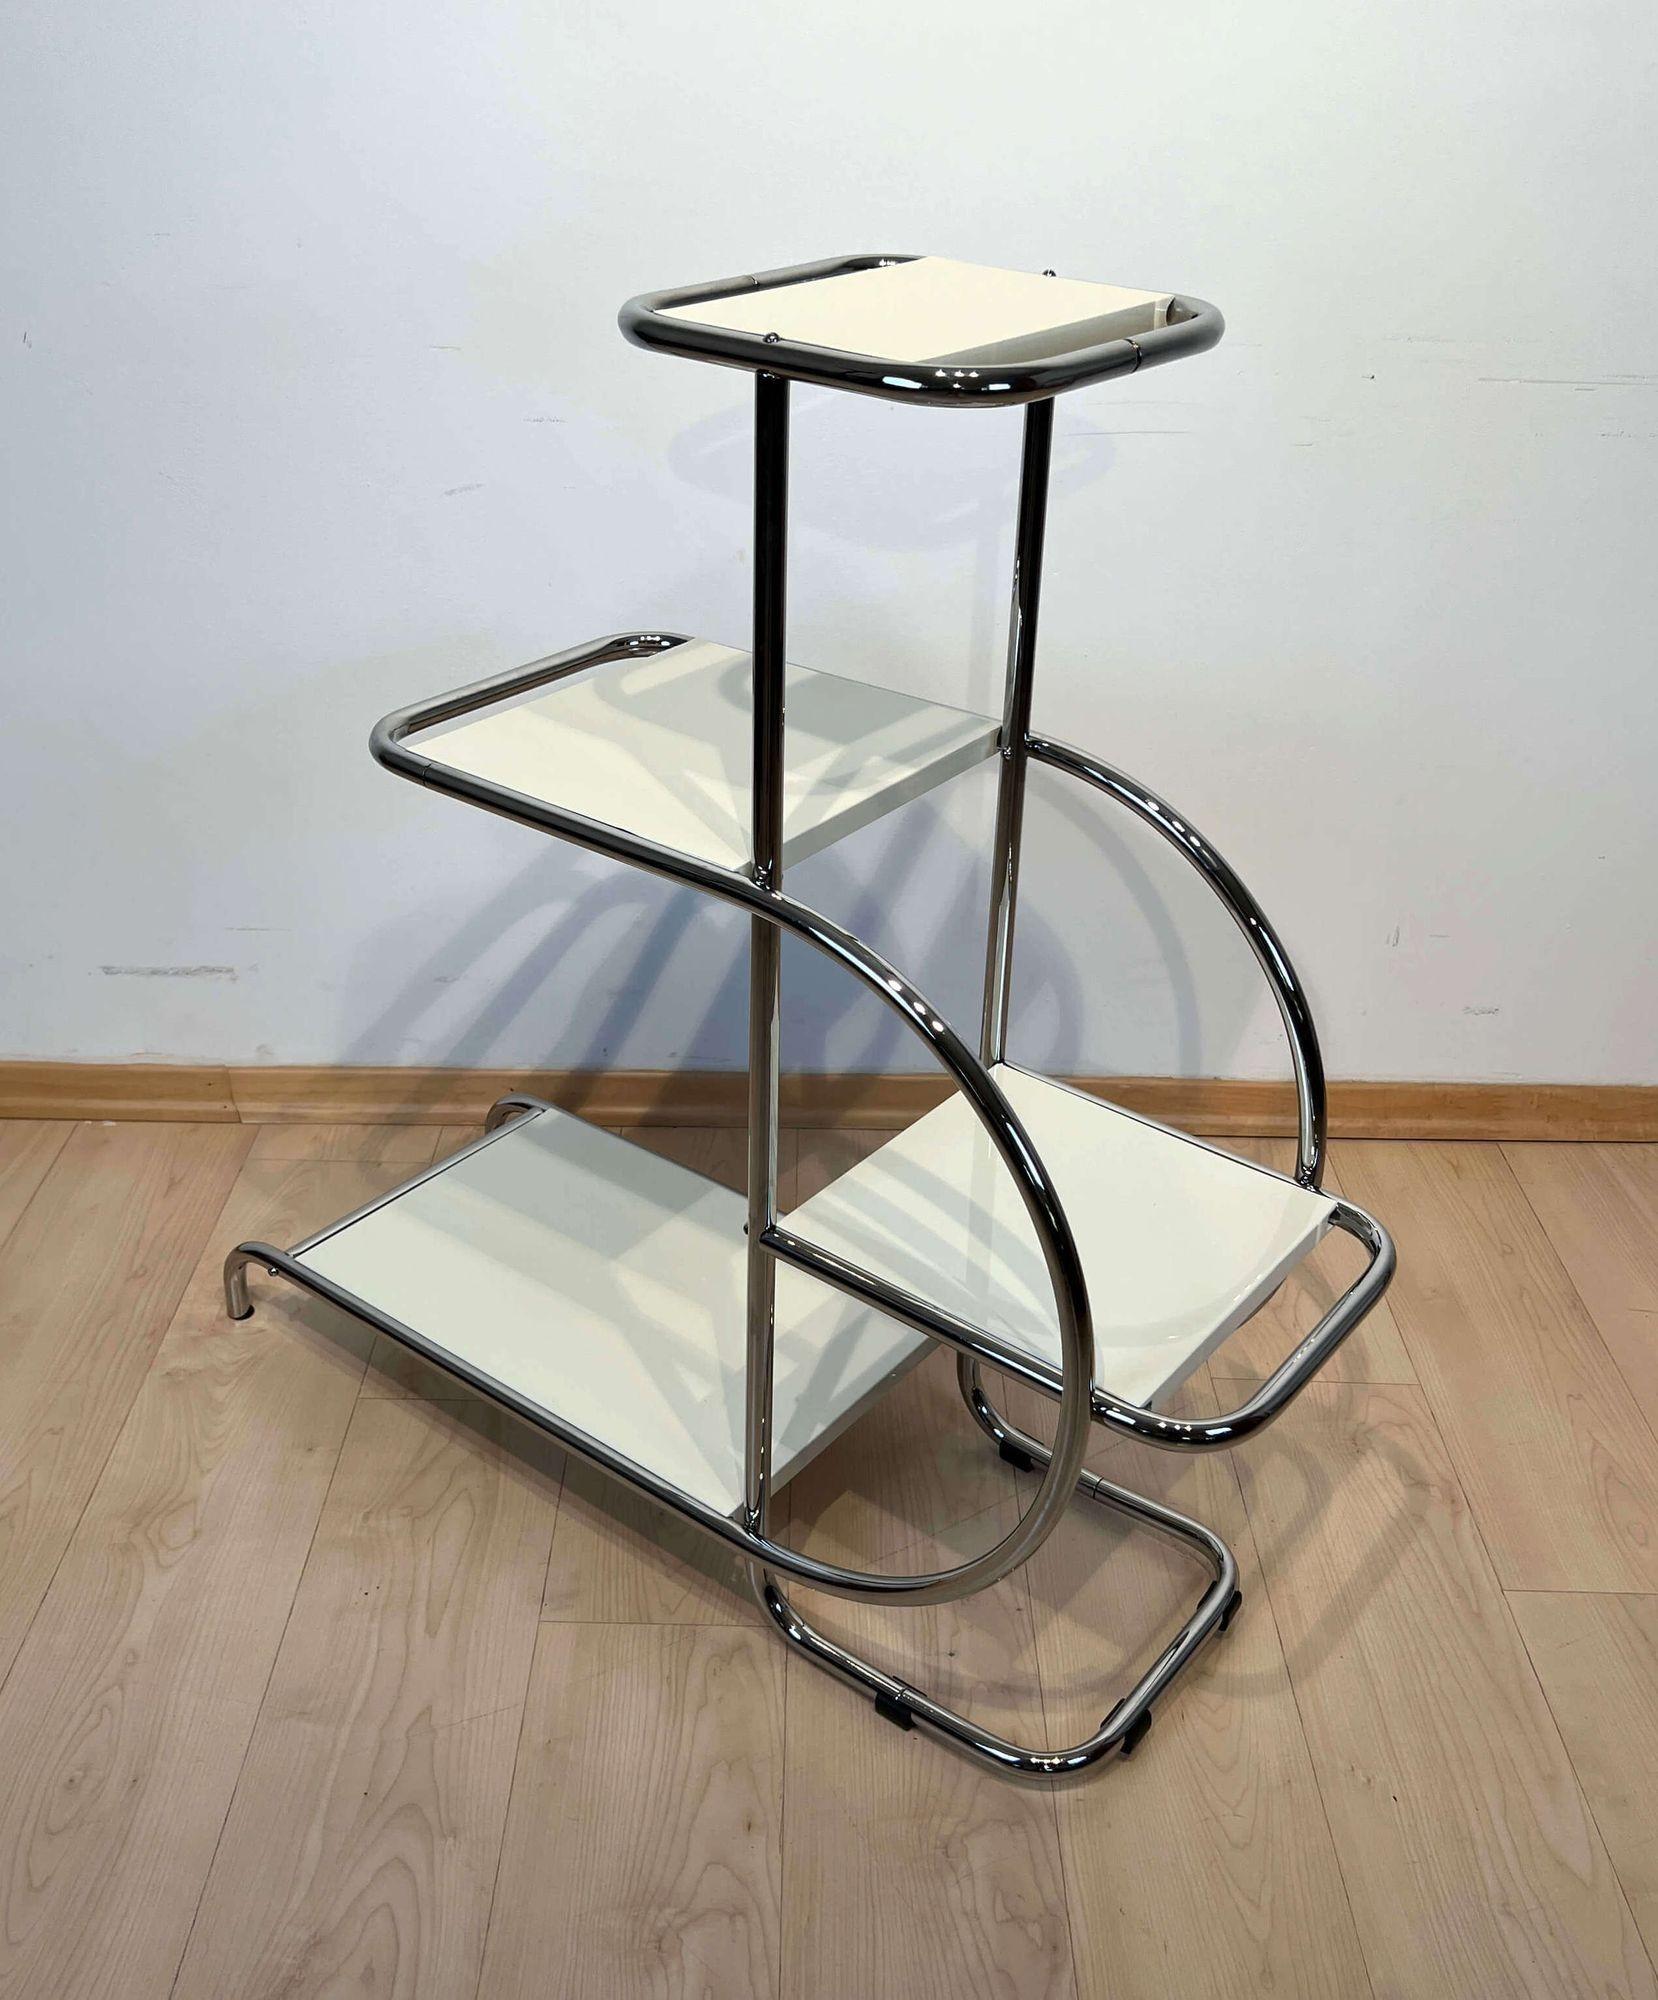 Bauhaus Steeltube Etagere, Creme-White Lacquer, Nickel Plate, Germany, 1930s For Sale 4